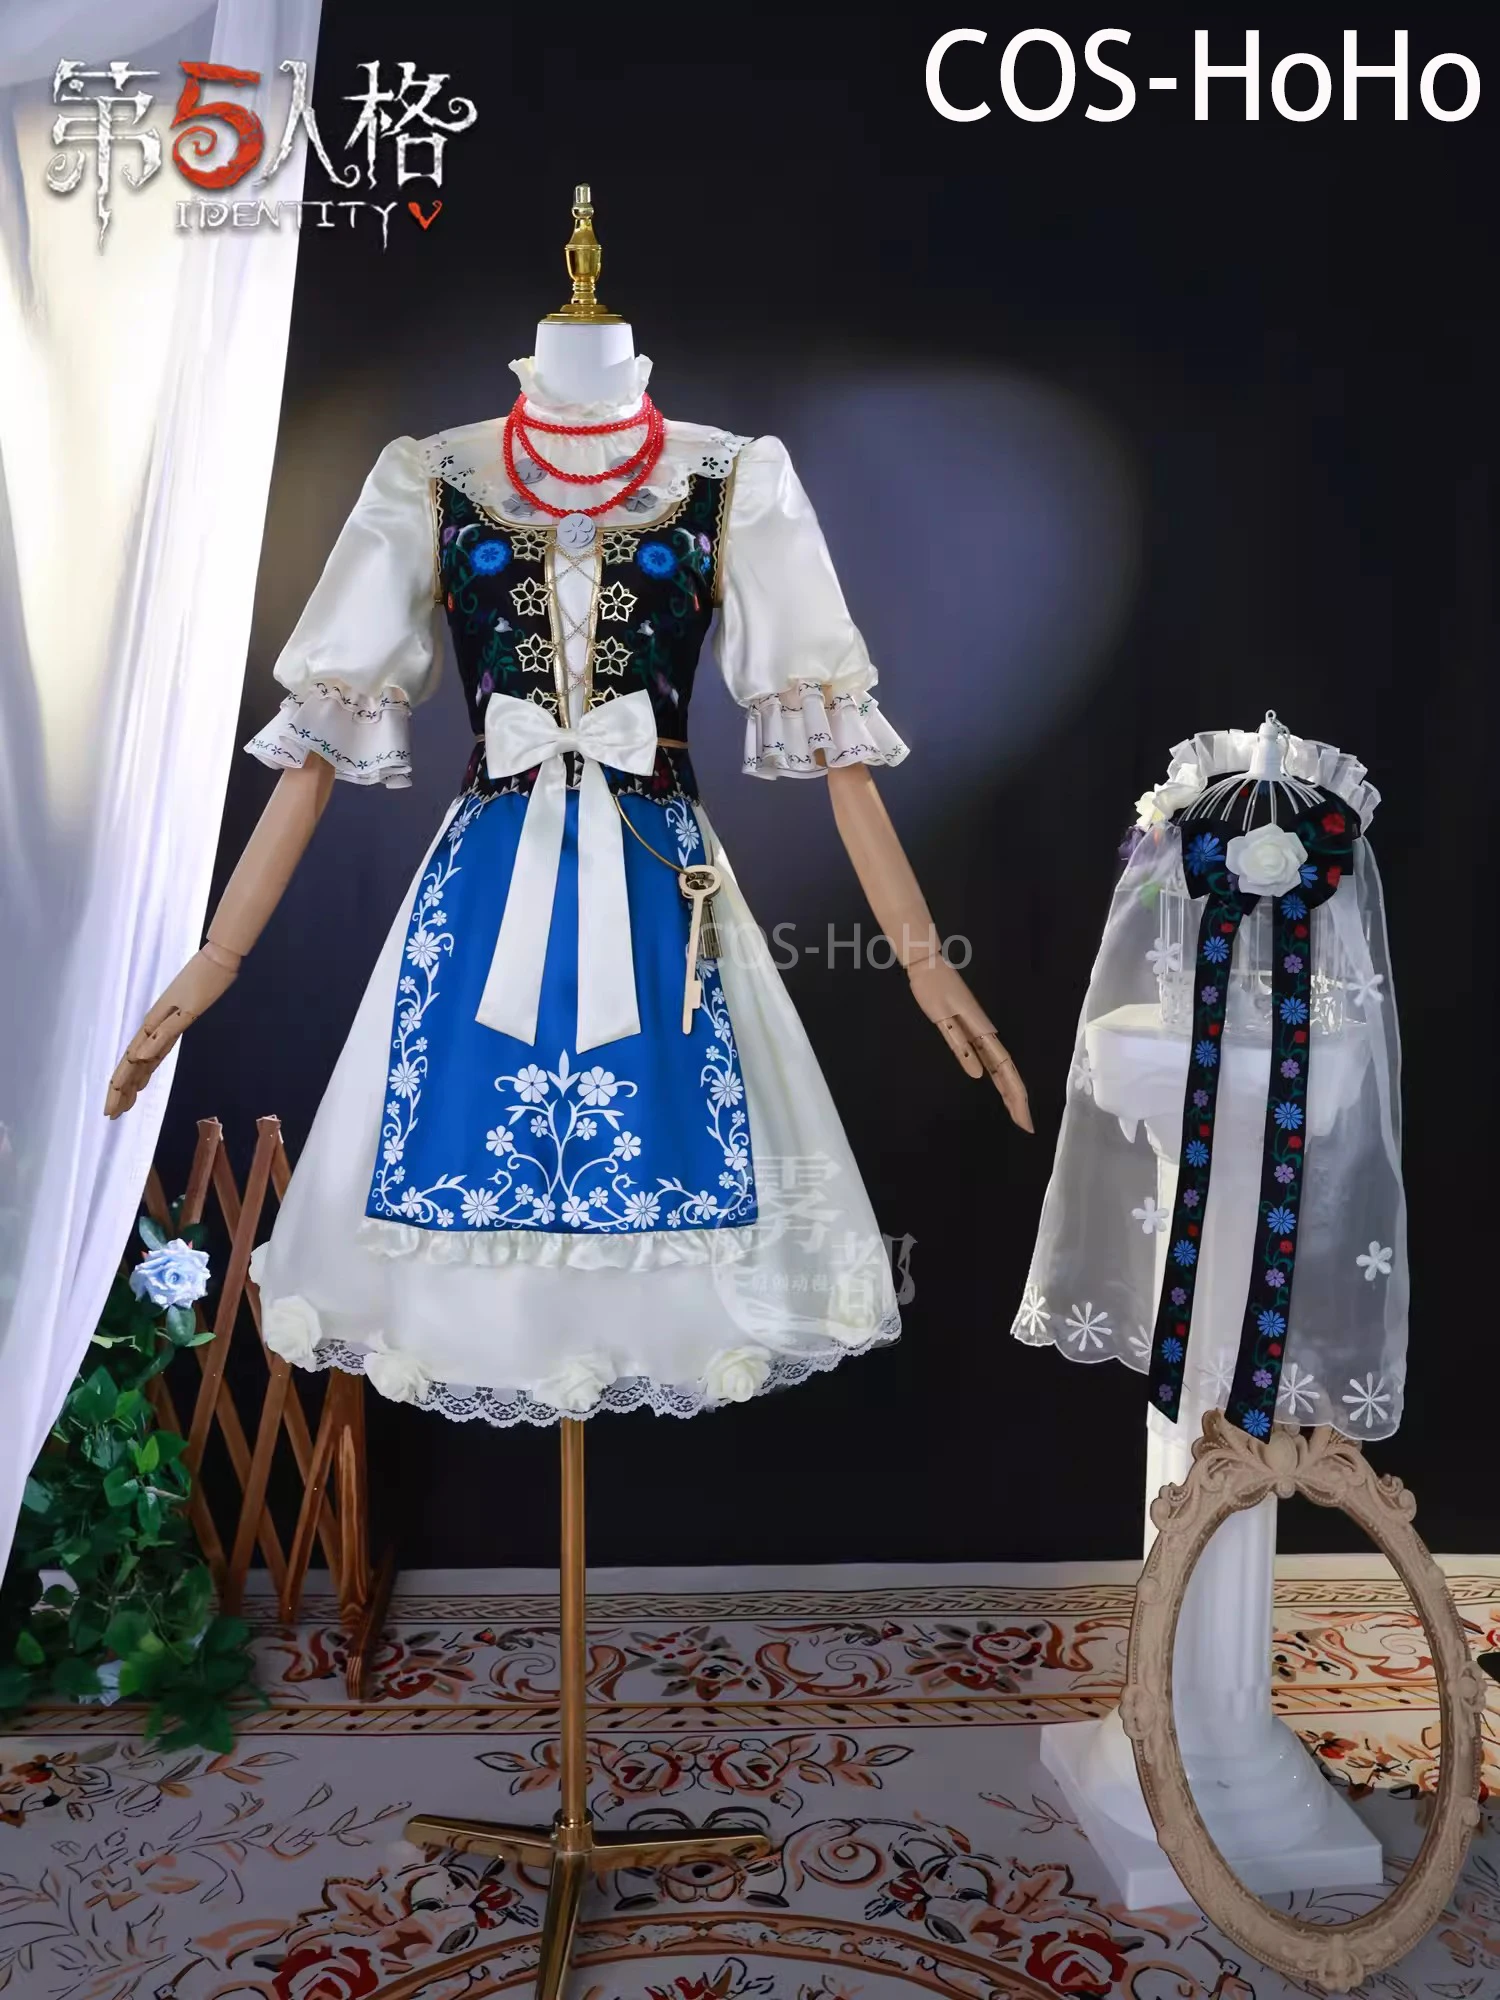 

COS-HoHo Identity V Vera Nair Perfumer Game Suit Lovely Dress Uniform Cosplay Costume Halloween Party Role Play Outfit Women